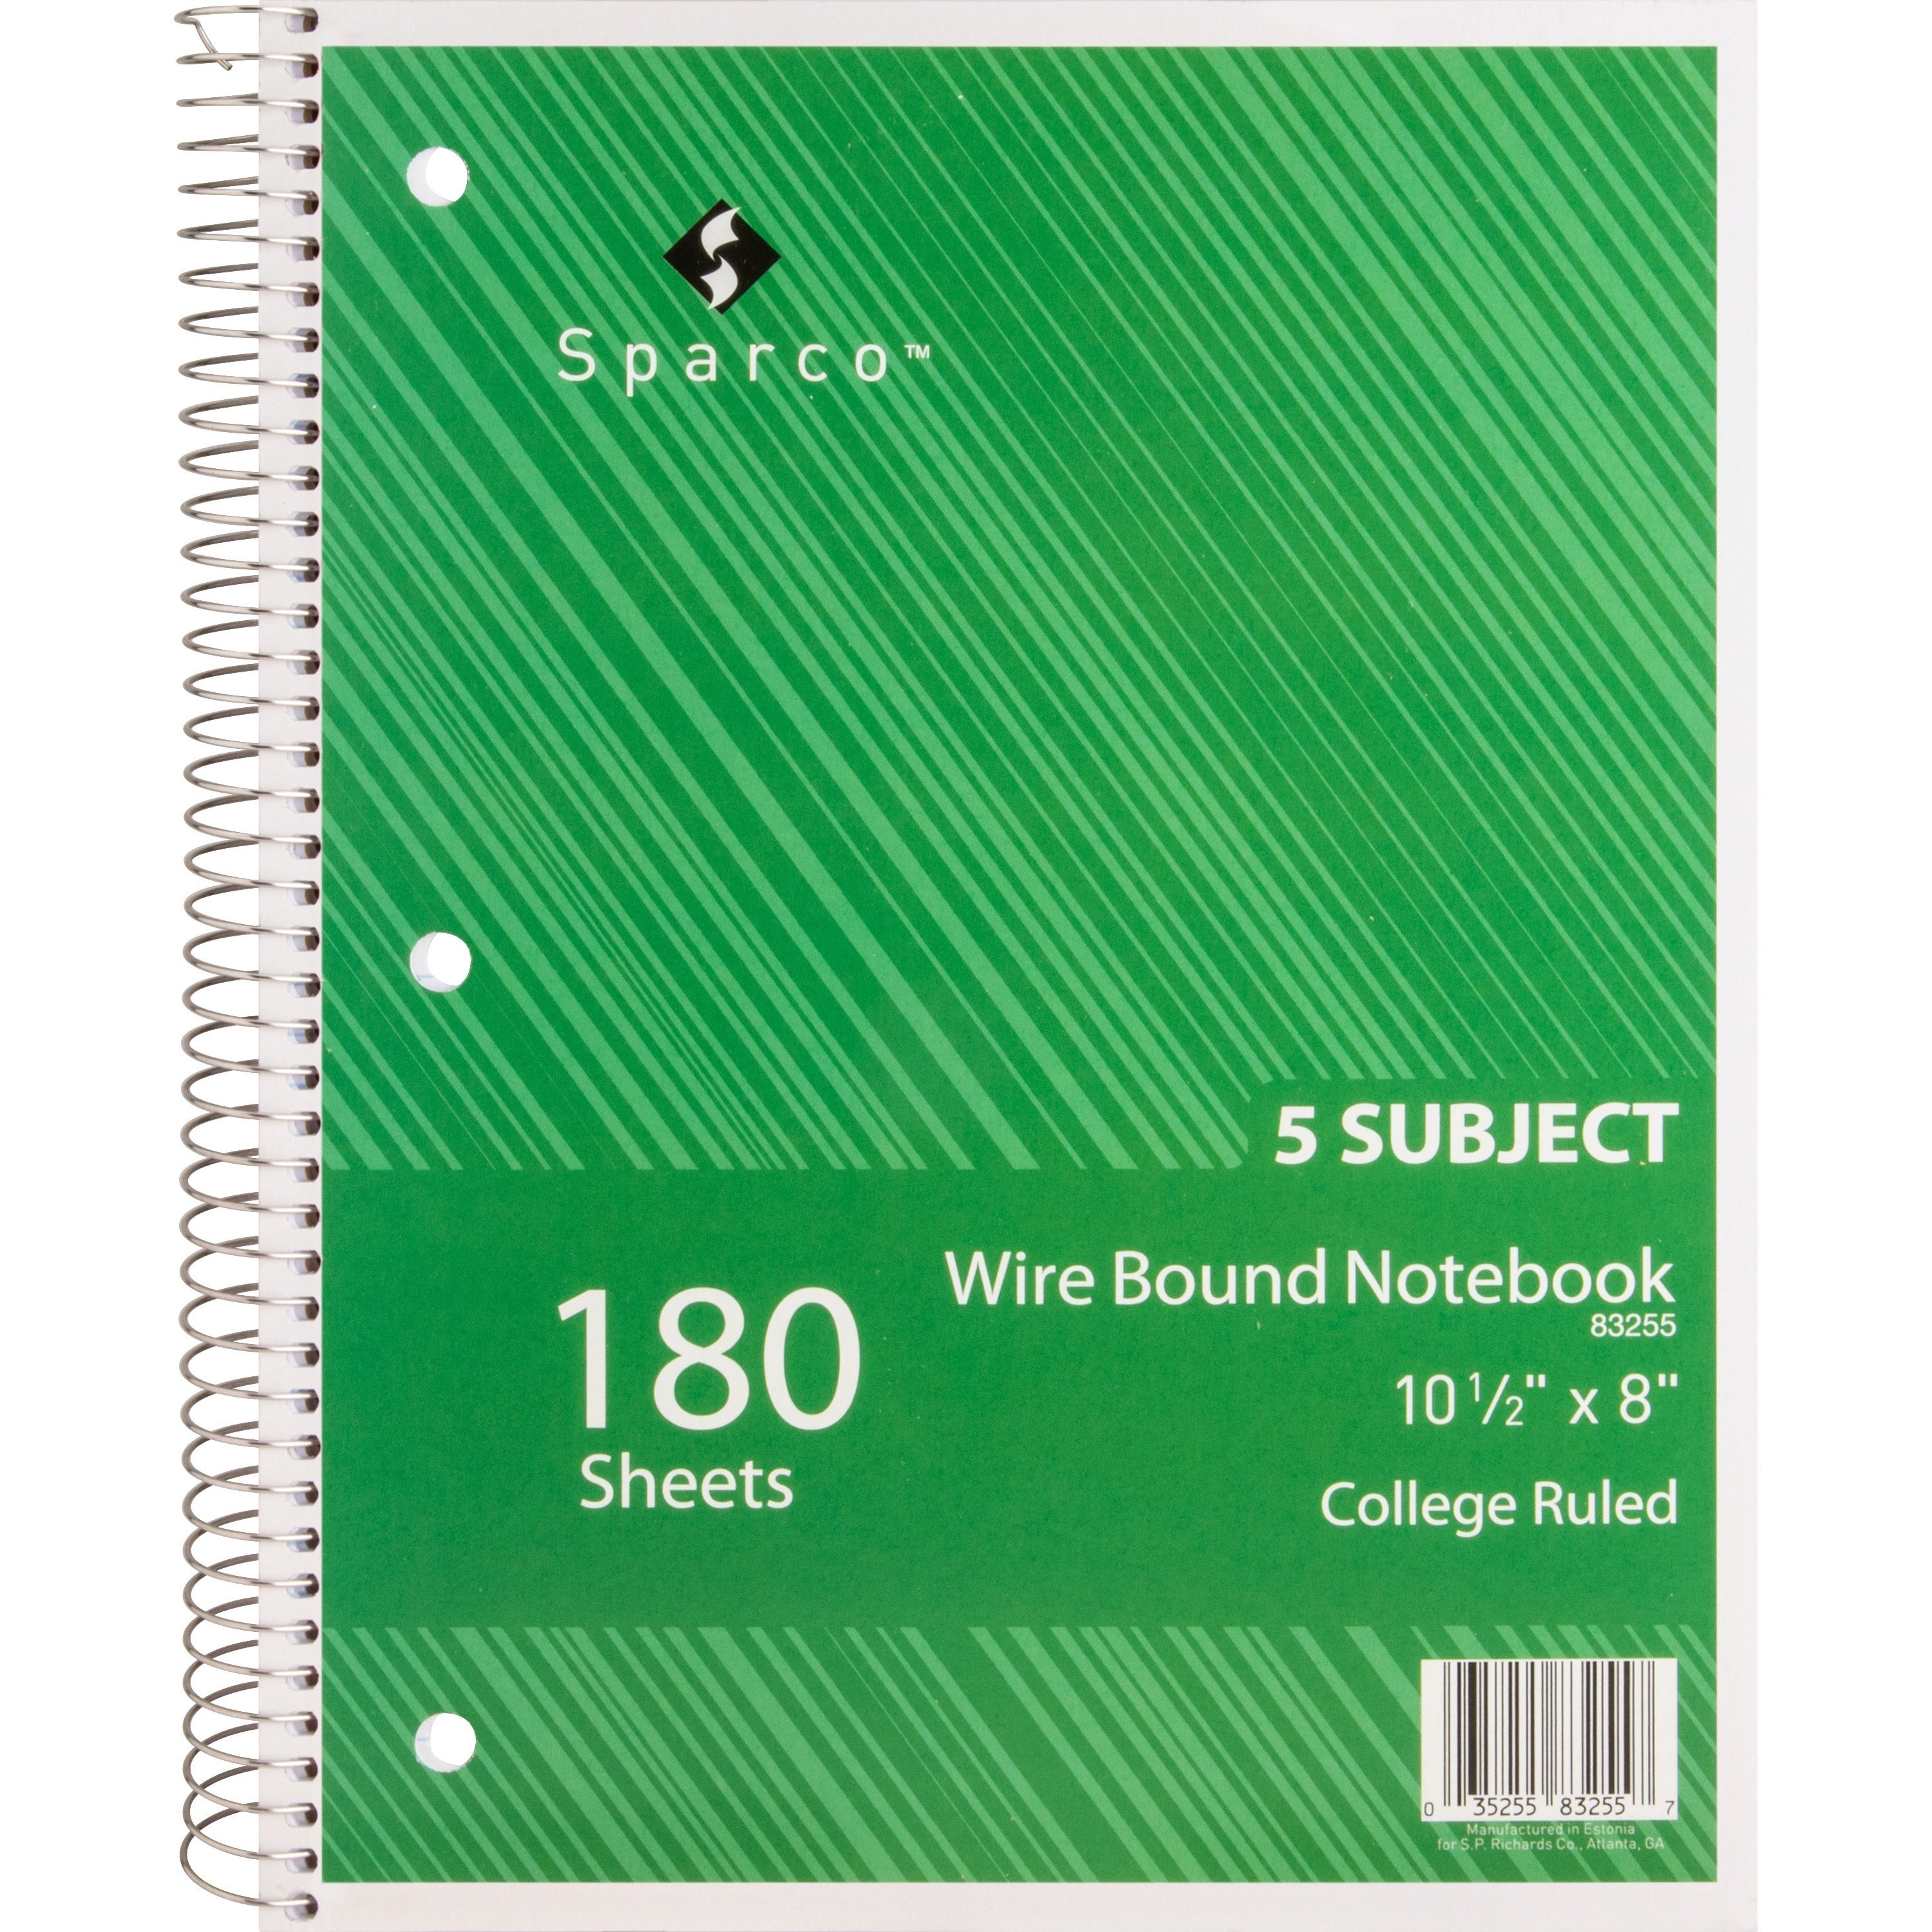 sparco-wirebound-college-ruled-notebooks-180-sheets-wire-bound-college-ruled-unruled-margin-8-x-10-1-2-assorted-paper-assortedchipboard-cover-resist-bleed-through-subject-stiff-back-stiff-cover-5-bundle_spr83255bd - 2